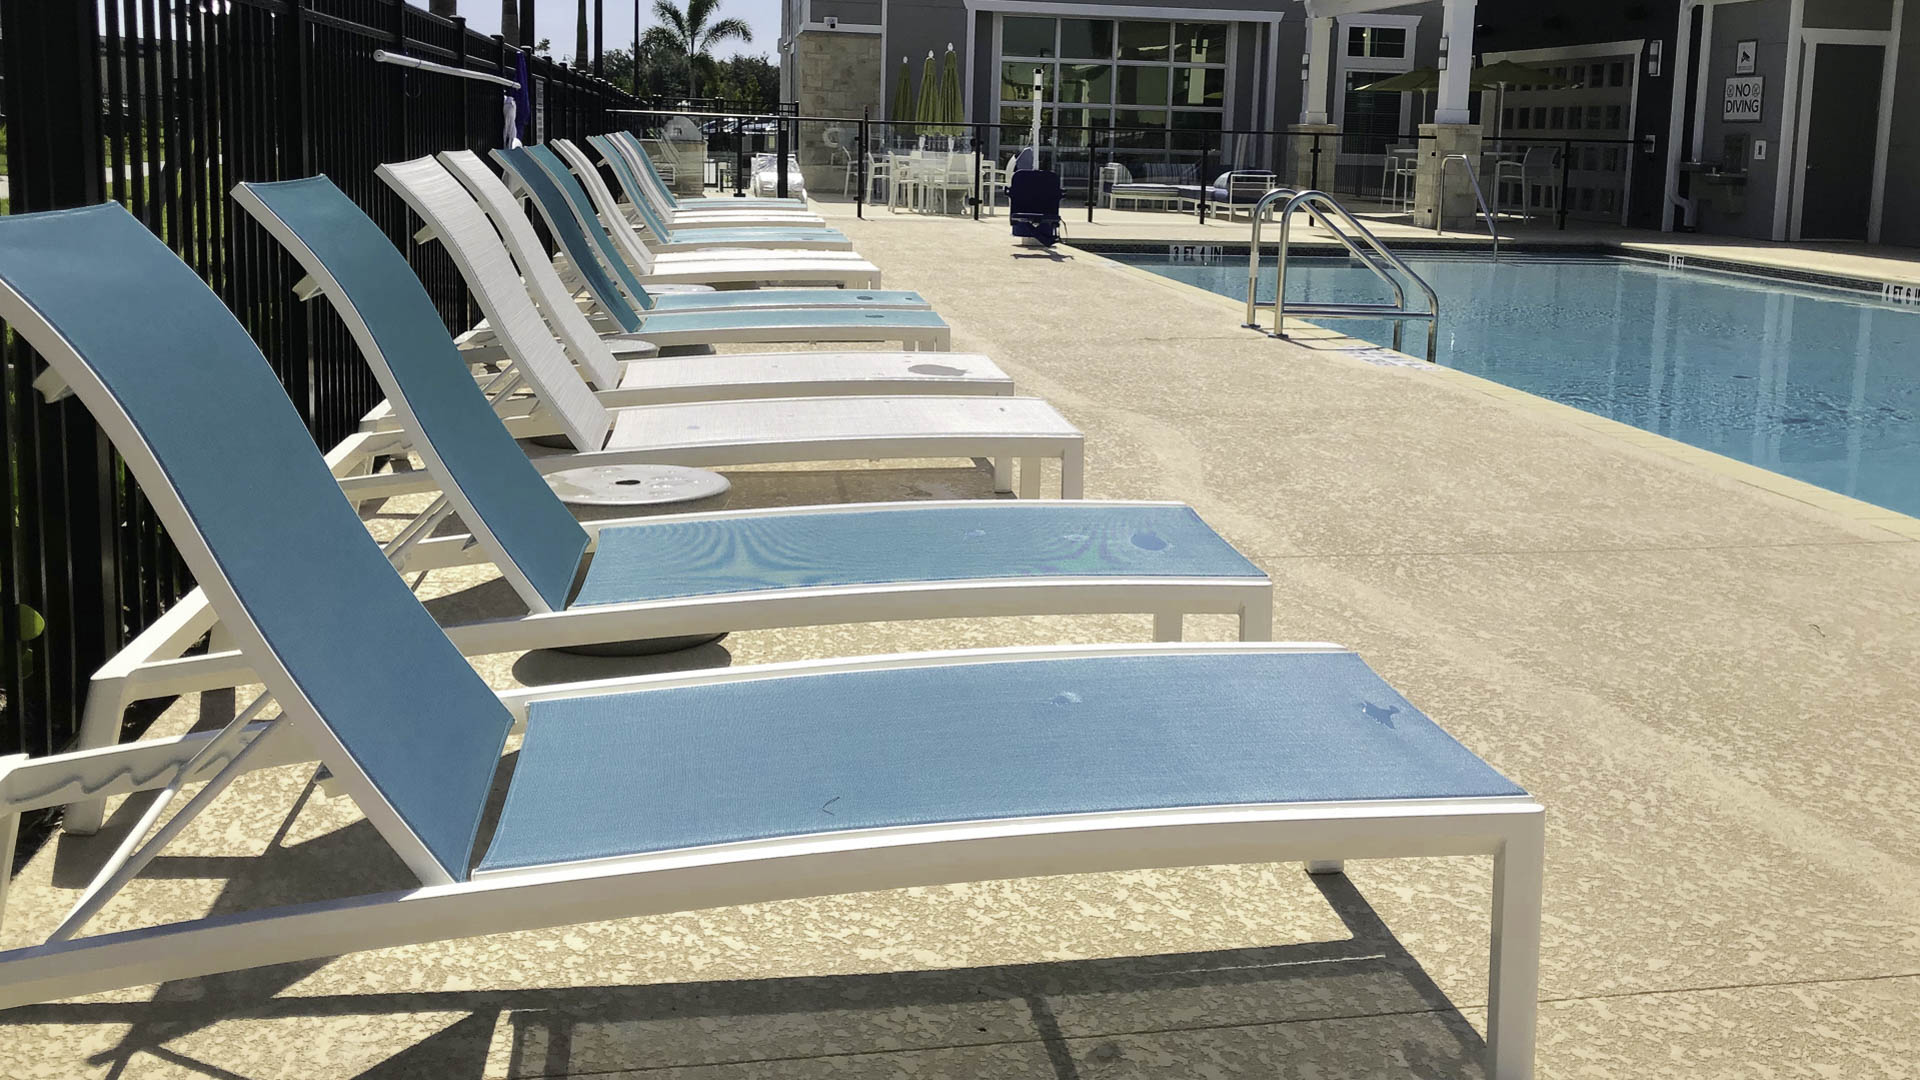 Springs at Hammock Cove pool lounge chairs